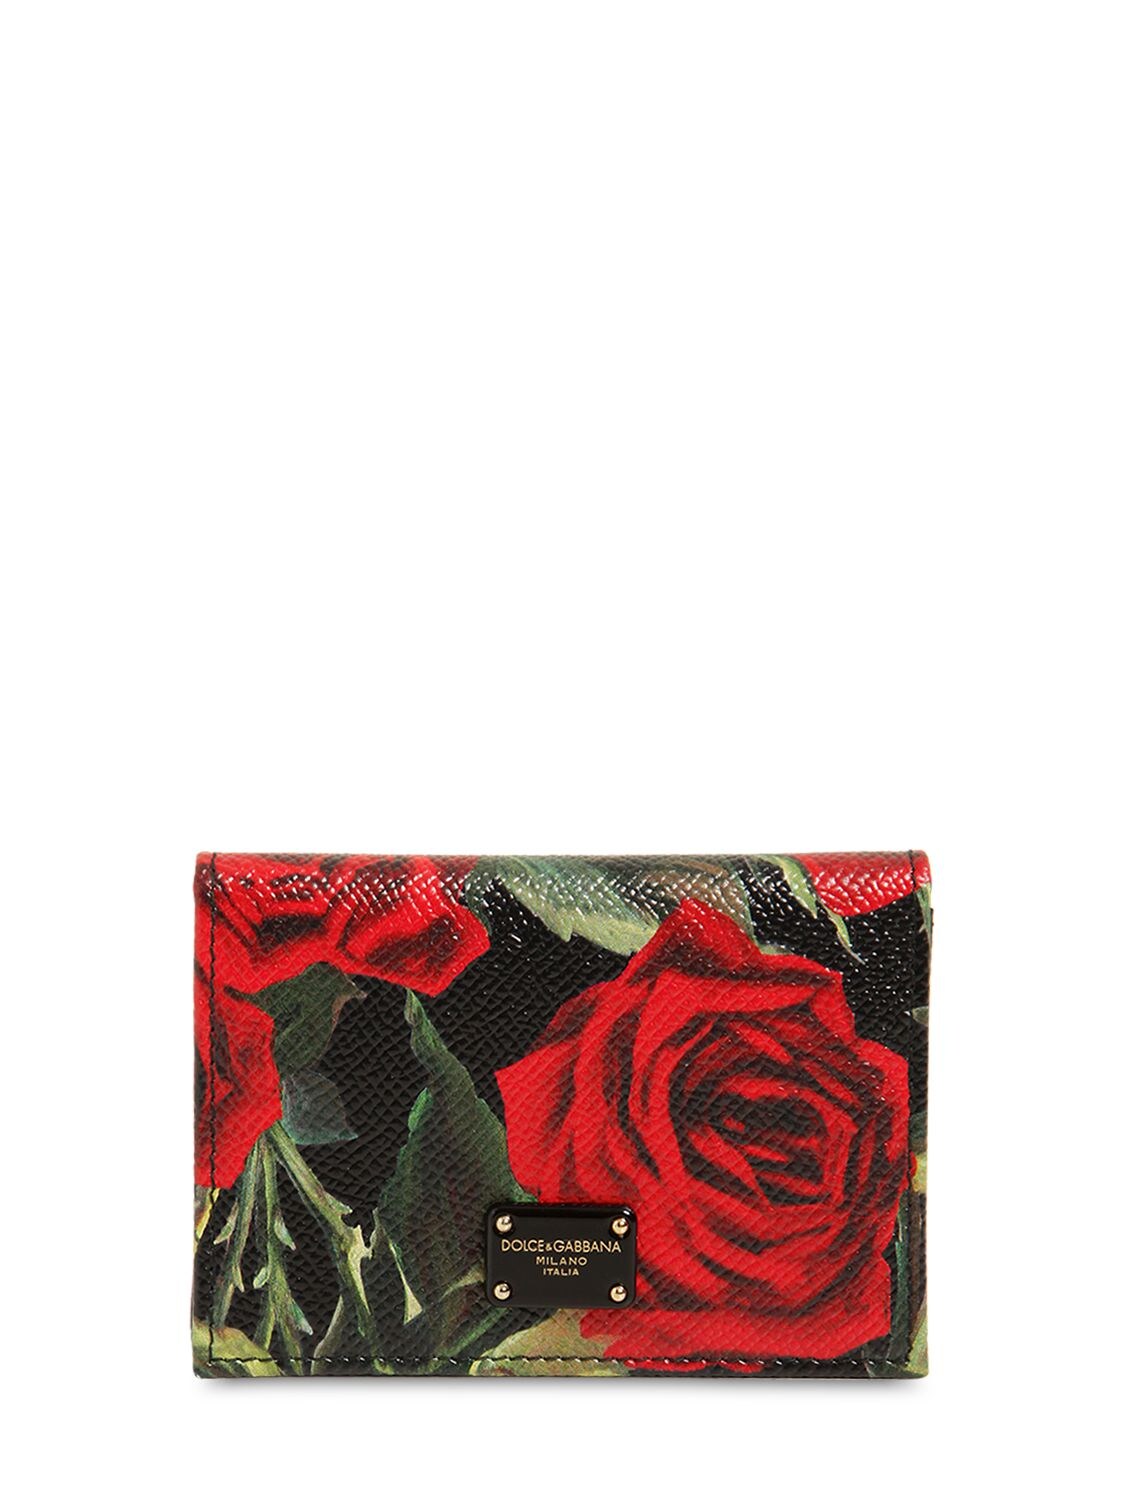 Dolce & Gabbana Roses Print Dauphine Leather Card Holder In Red/black